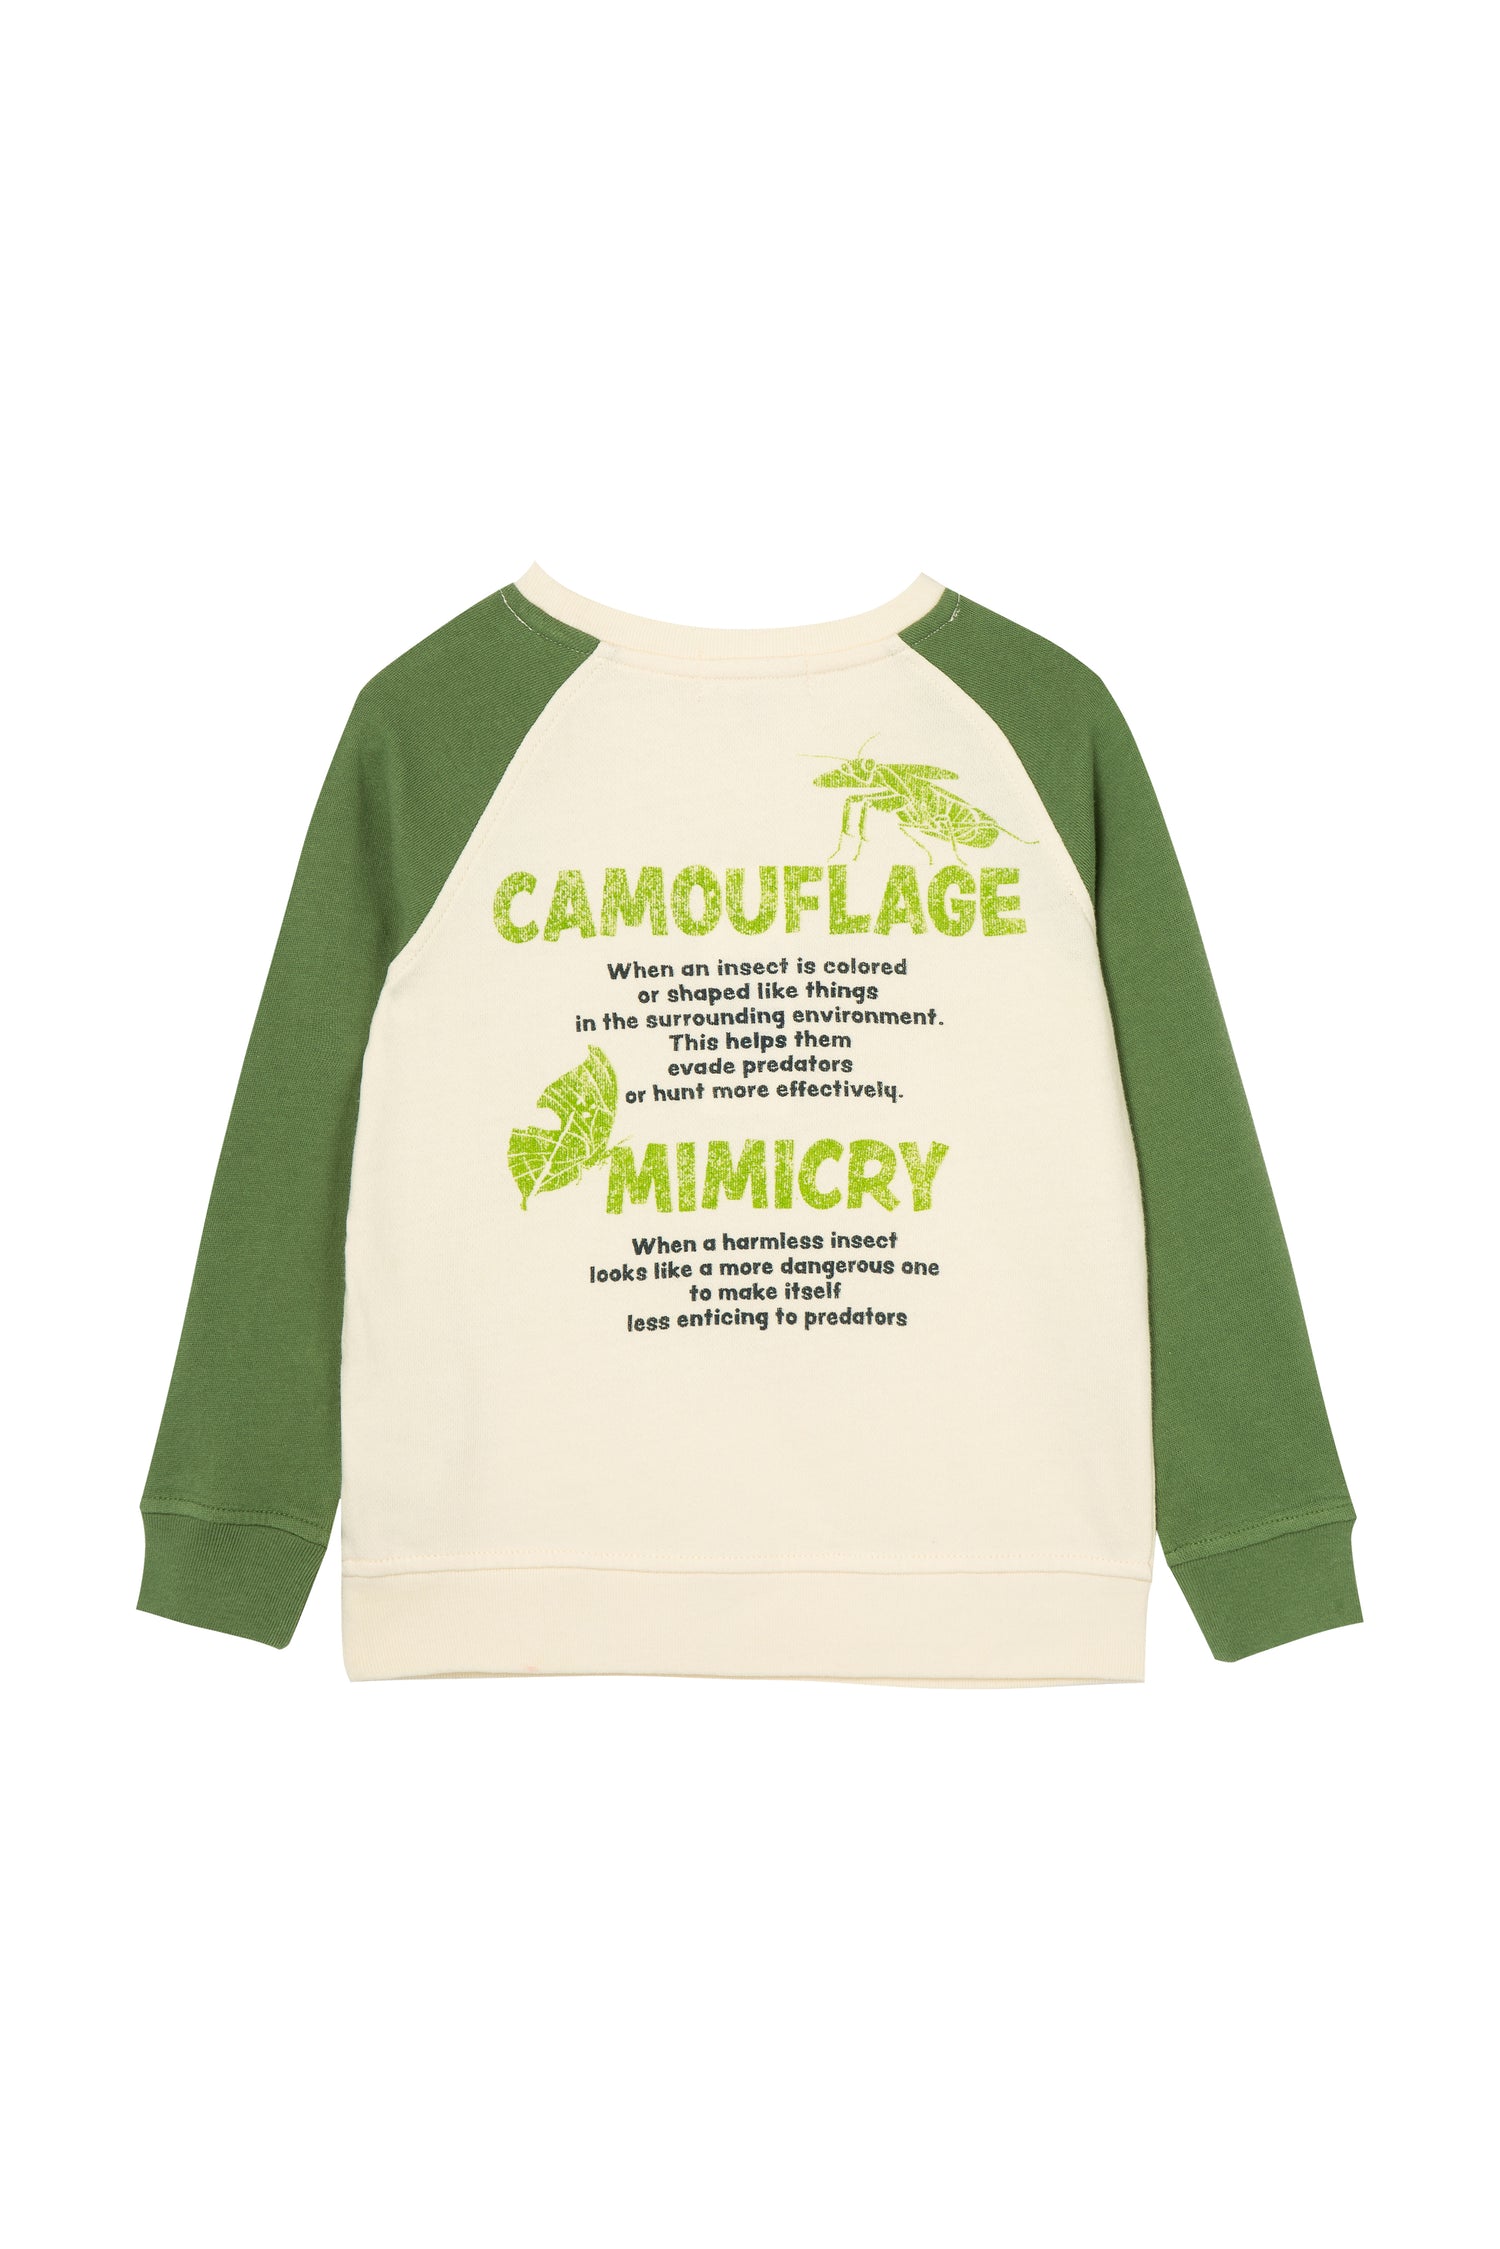 Back of green & white sweatshirt with text explaining camouflage and mimicry